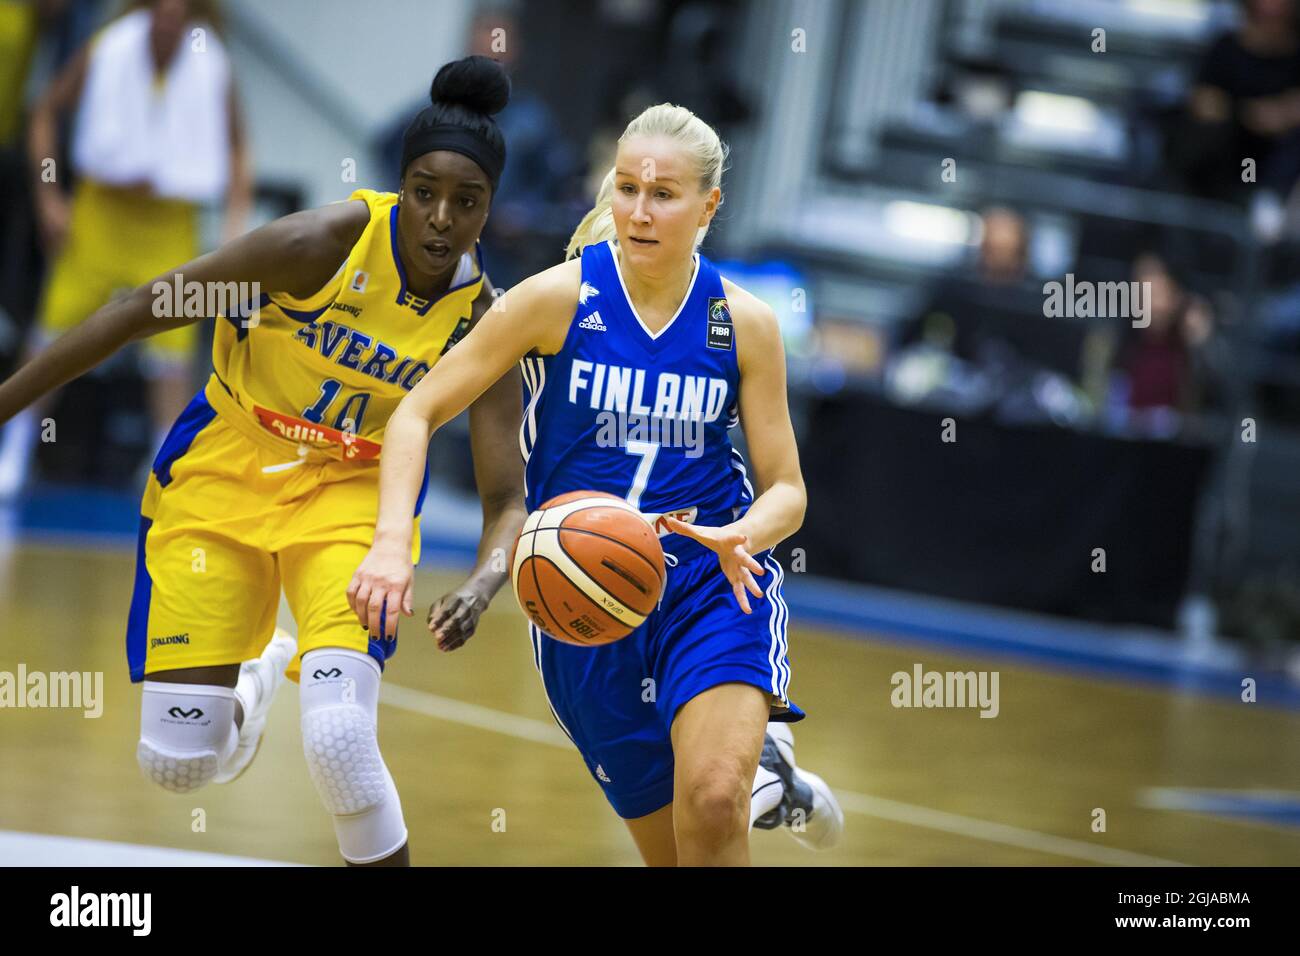 Finlands Anni Makitalo (7) is chased by Sweden's Binta Drammeh (10) during the FIBA women's Eurobasket qualification group I match between Sweden and Finland at Lulea Energi Arena in Lulea in northern Sweden, on Nov. 23, 2016. Photo: Robert Nyholm / TT / code 11435  Stock Photo